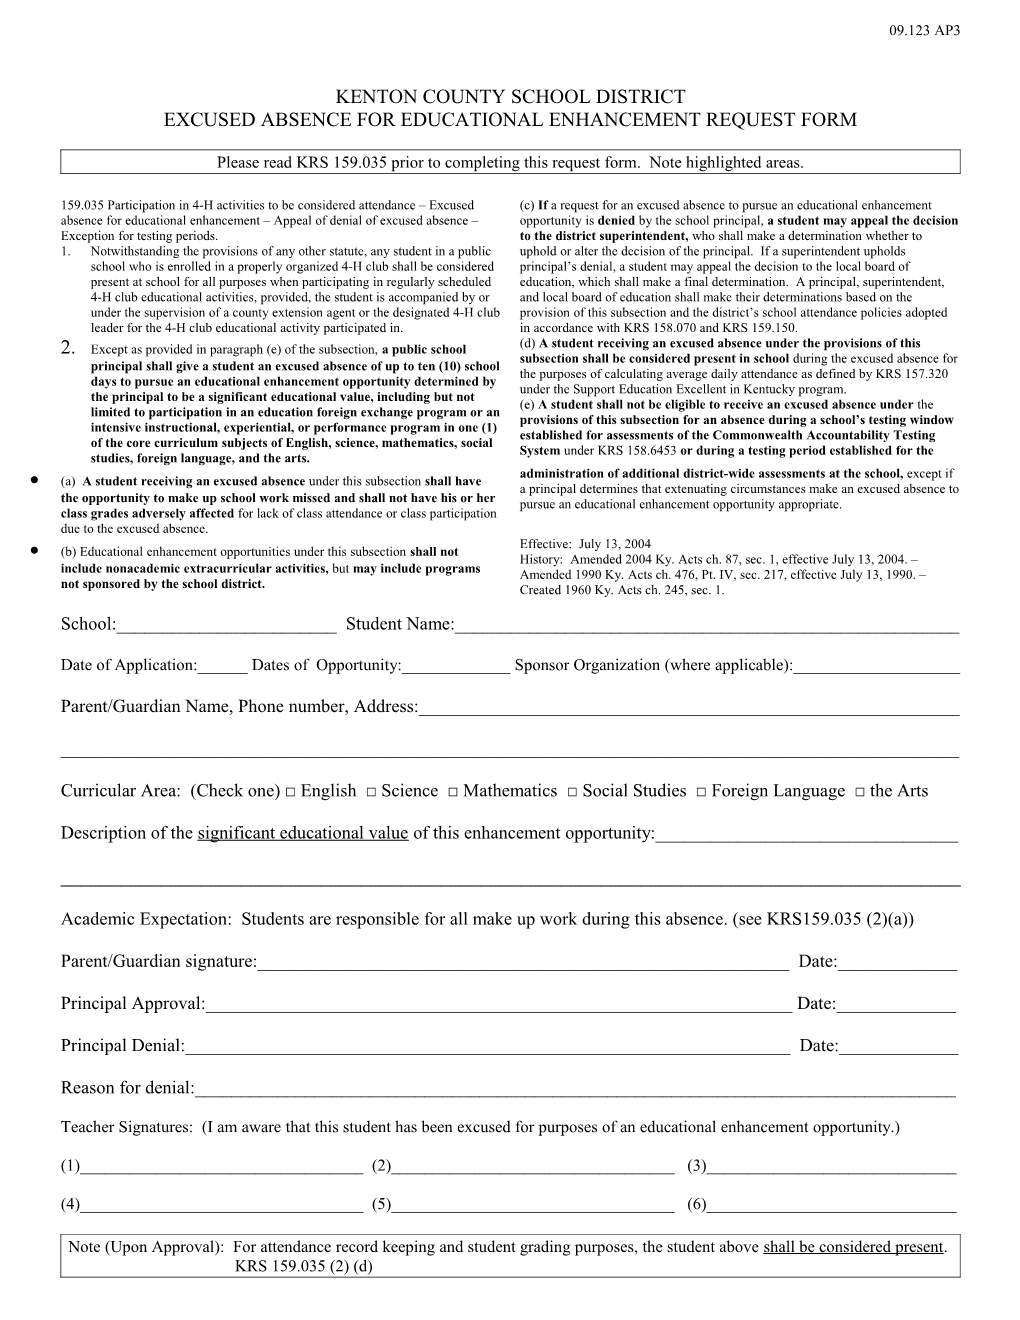 Excused Absence for Educational Enhancement Request Form